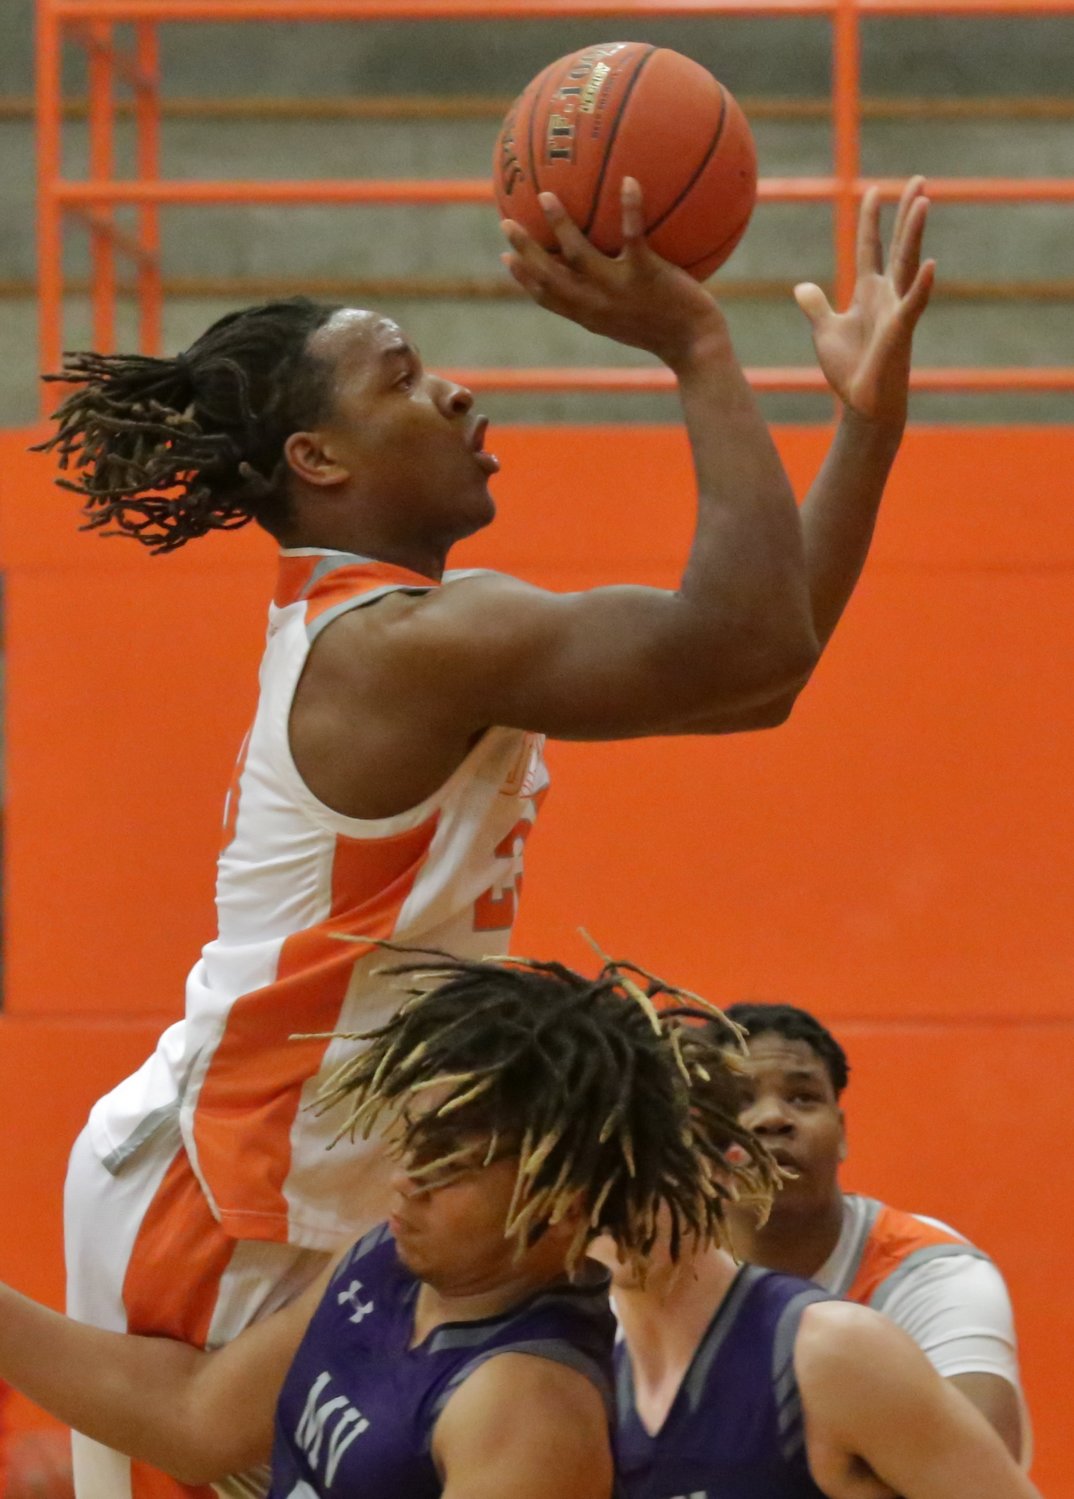 Mineola’s Trevion Sneed elevates to the basket in action against Mount Vernon.